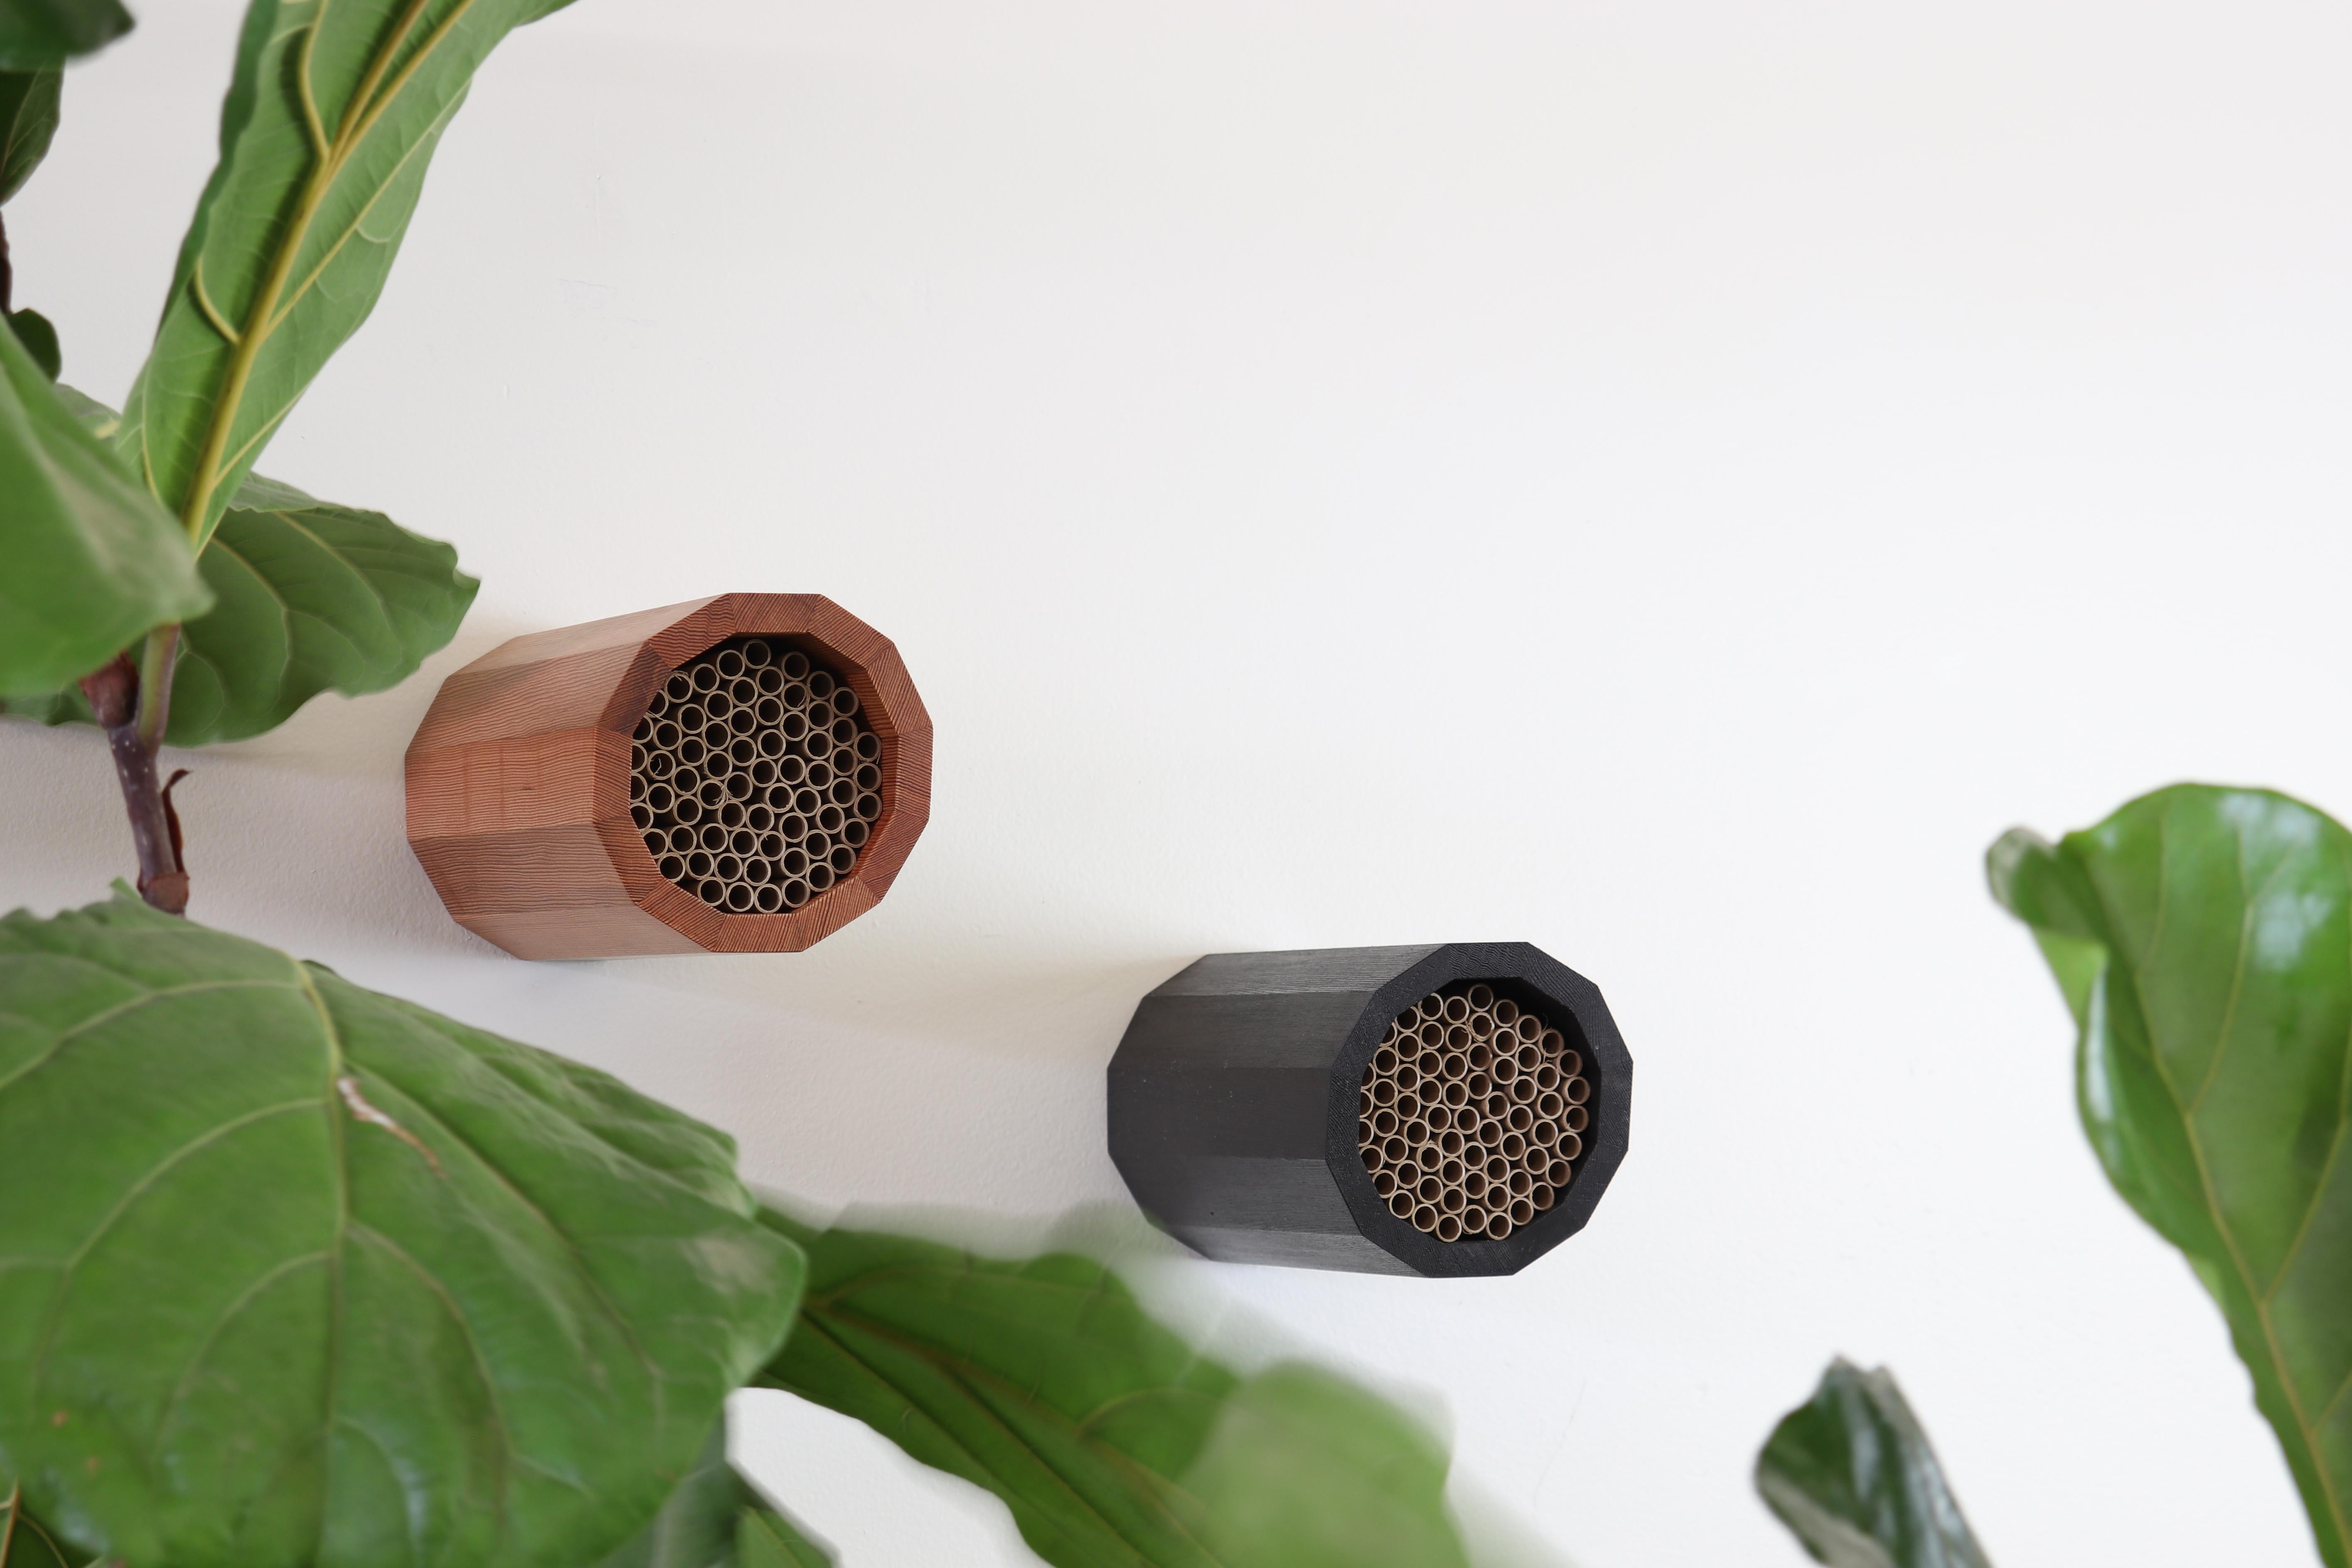 Handmade in-house by Material with solid wood and stocked with re-fillable compostable tubes, this Mason Bee House is an excellent way to invite these friendly and beneficial pollinators into your yard and garden. Simply hang in an area with some